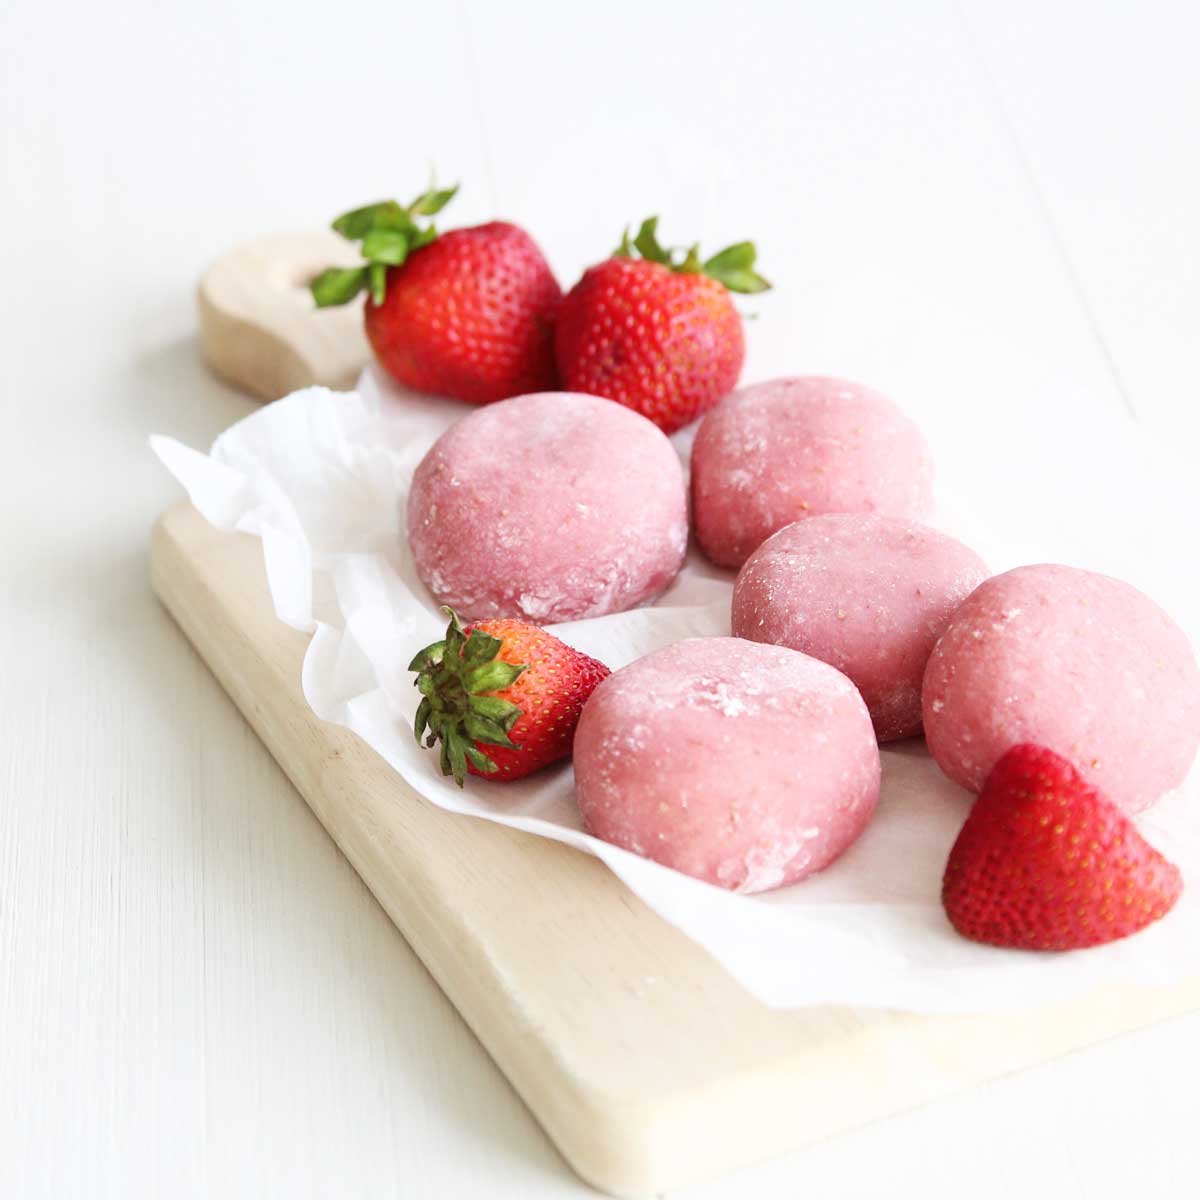 How to Make Healthy Strawberry Mochi (Made in the Microwave) - Raspberry Cheesecake Protein Bars